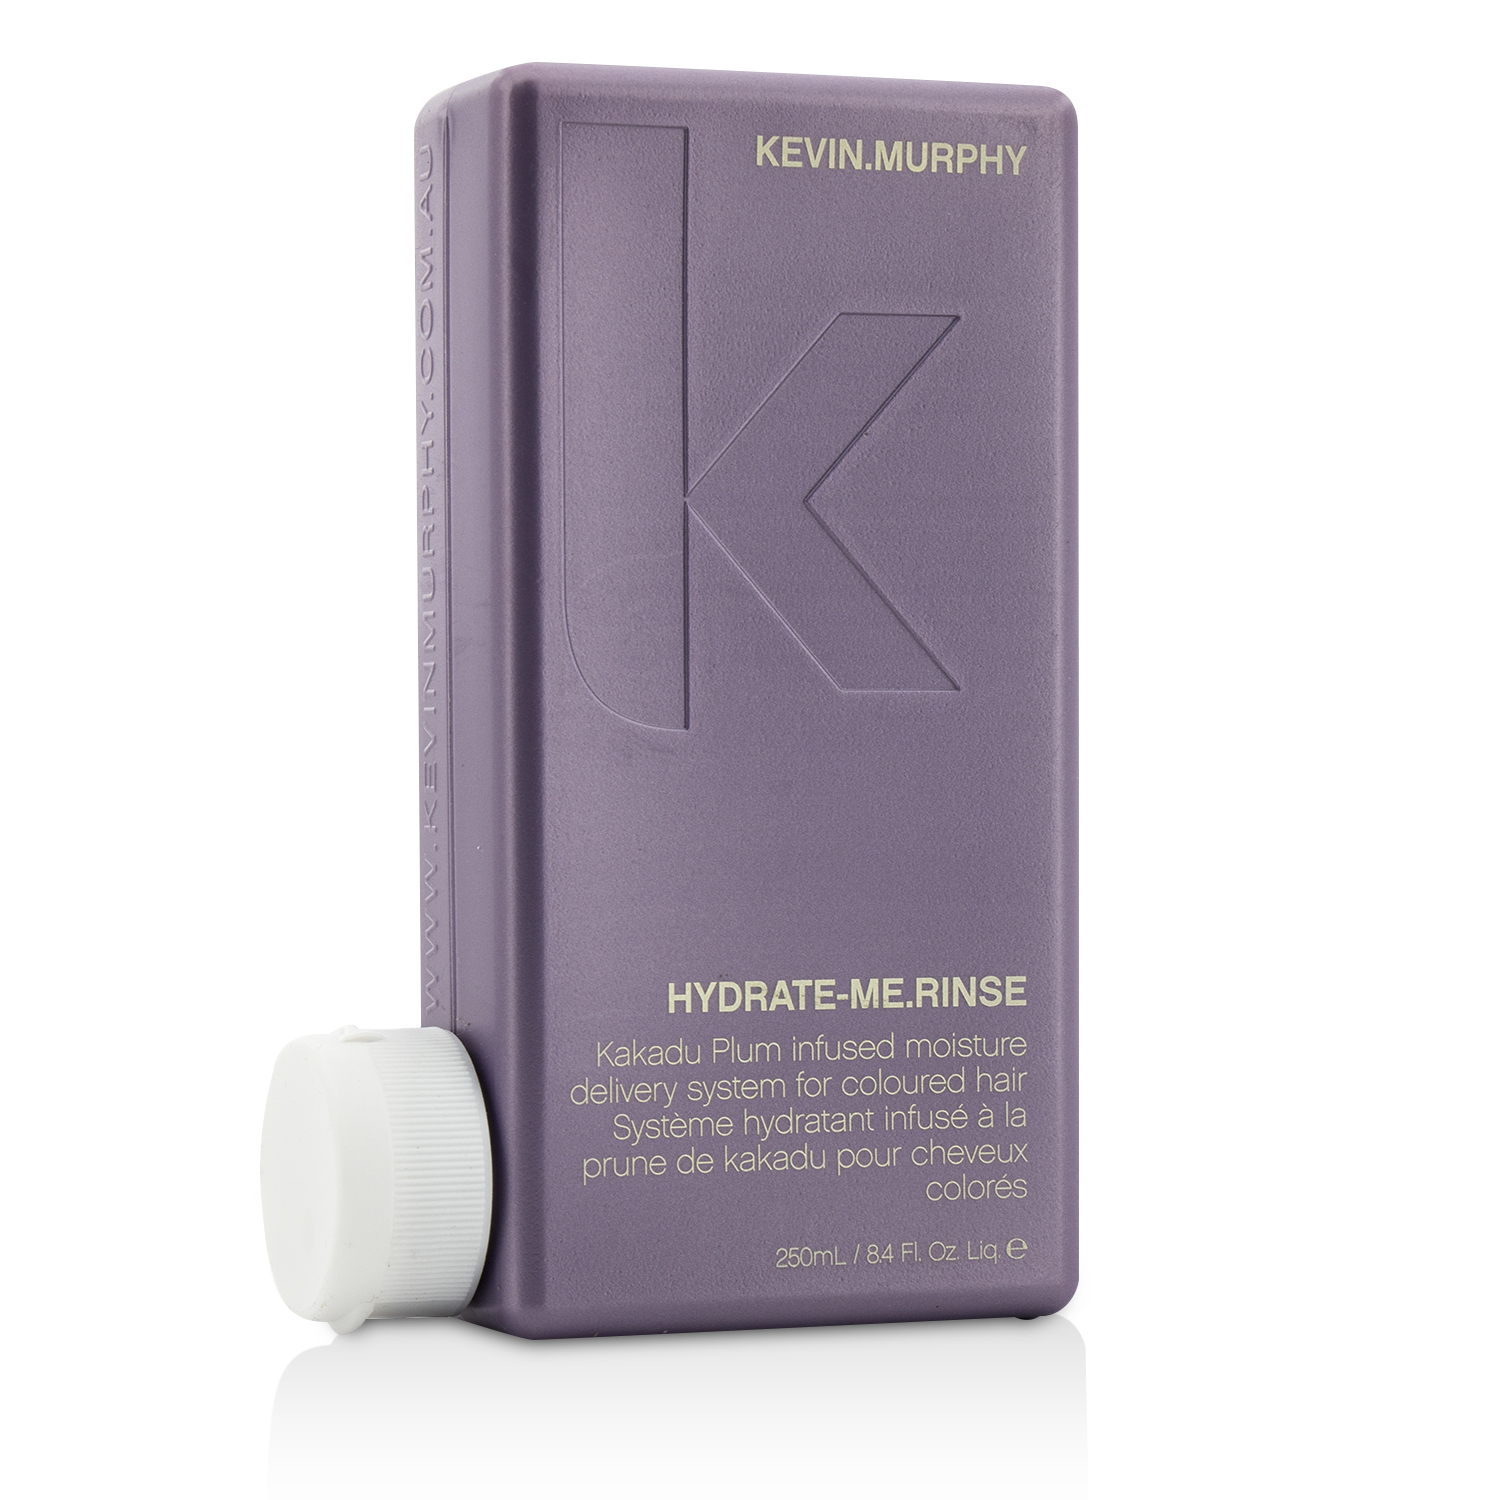 Hydrate-Me.Rinse (Kakadu Plum Infused Moisture Delivery System - For Coloured Hair) Kevin.Murphy Image